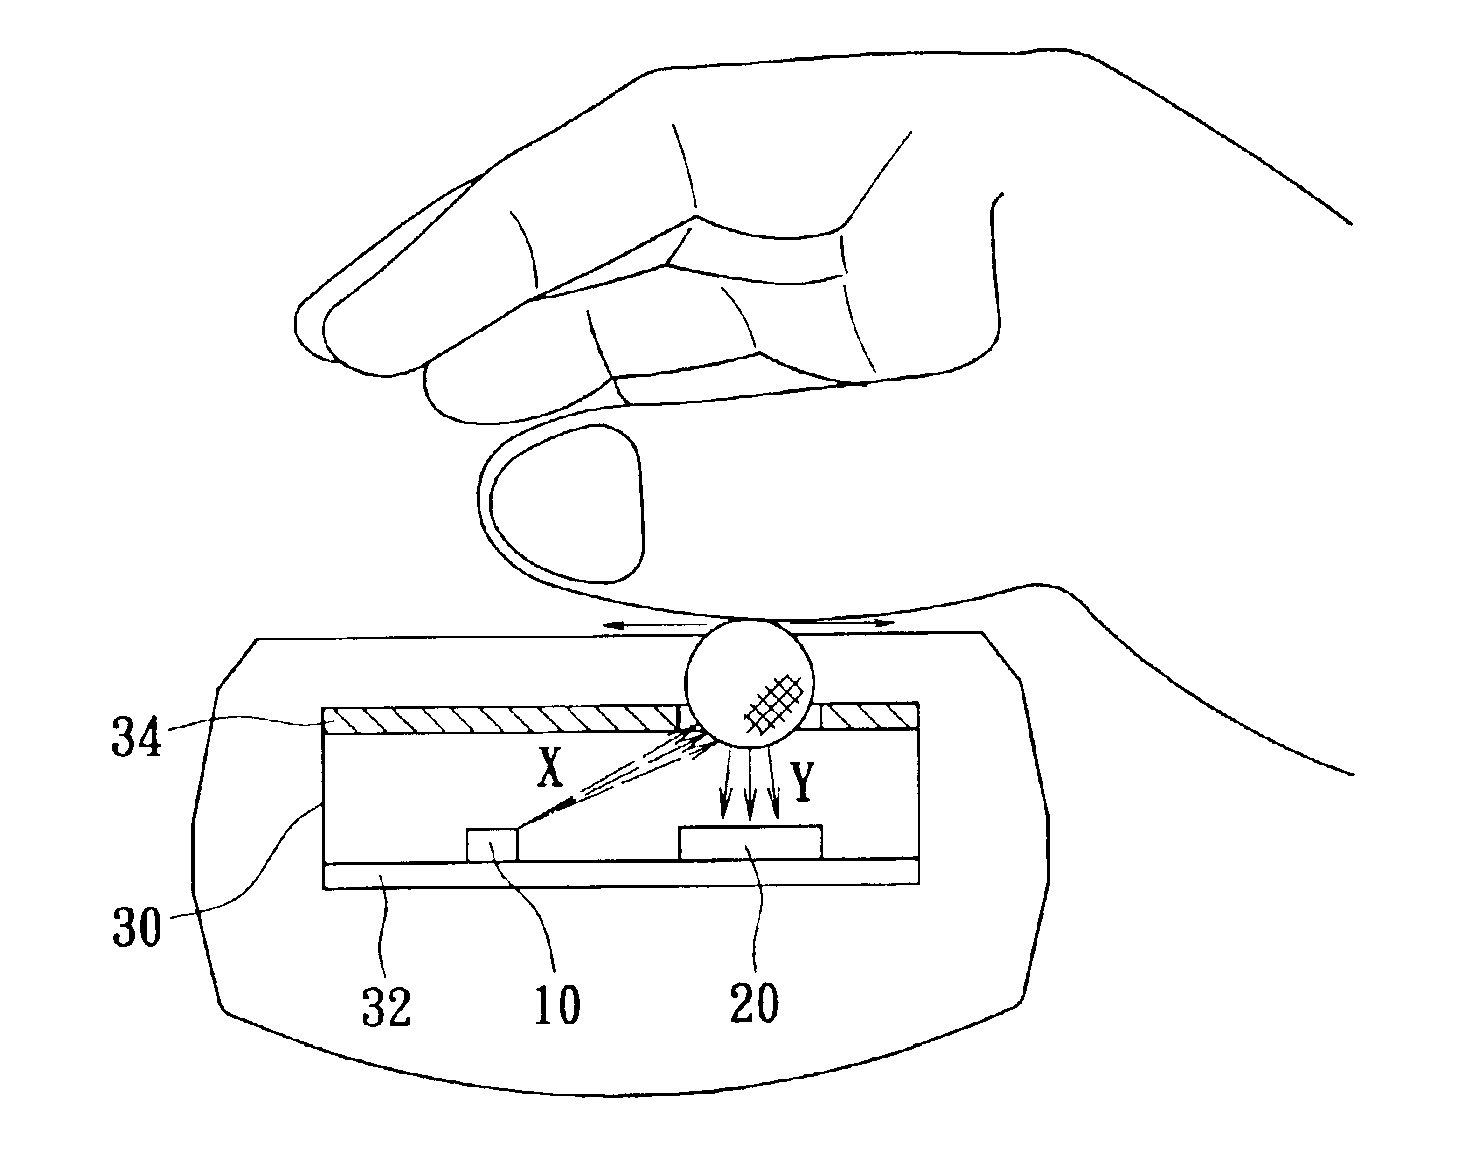 Optical mouse with rolling ball